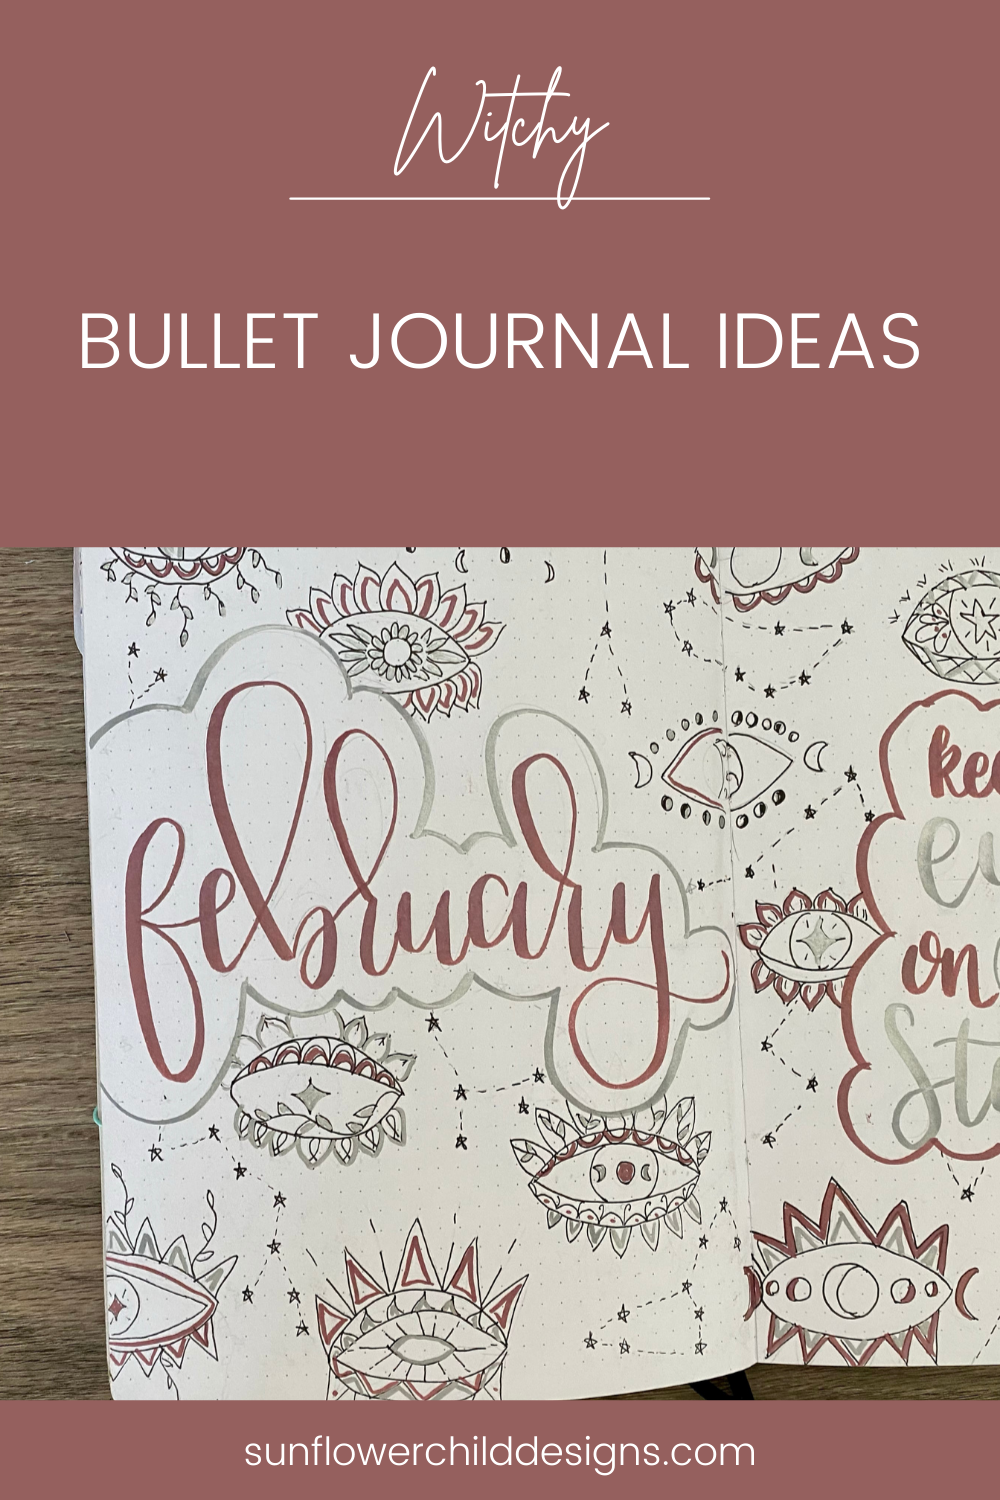 witchy-bullet-journal-ideas-february-bullet-journal-ideas 8.png